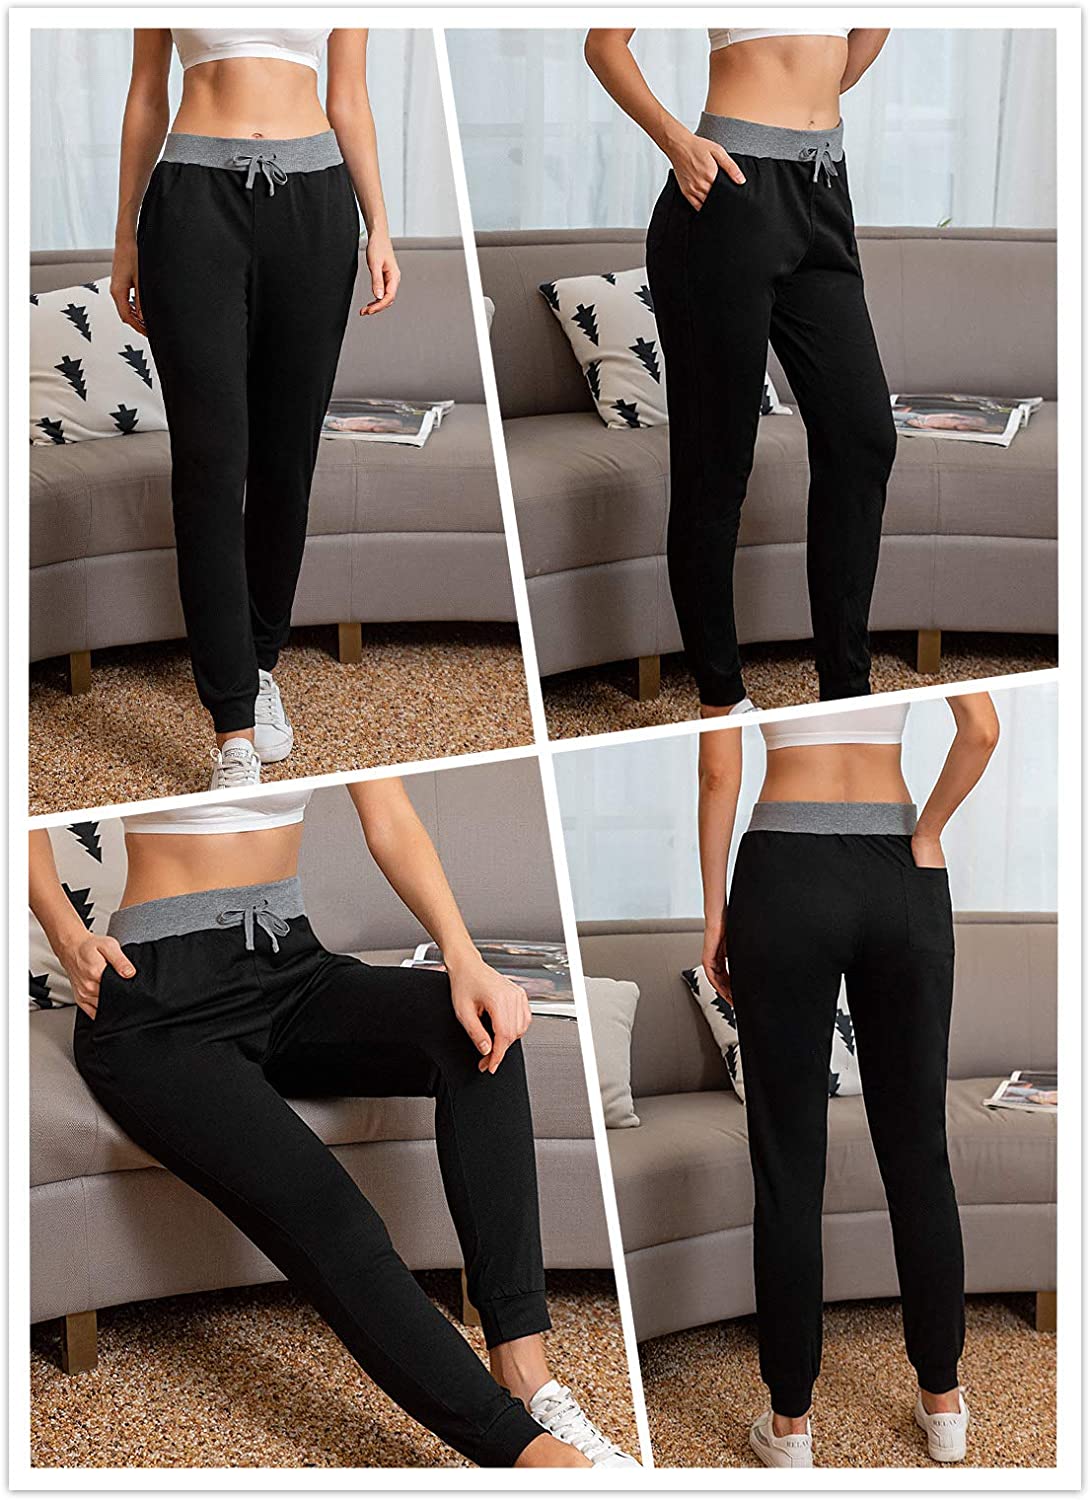 YUNDAI Women Joggers Cozy Cotton Sweatpants Tapered Active Yoga Lounge Track Pants with Pockets